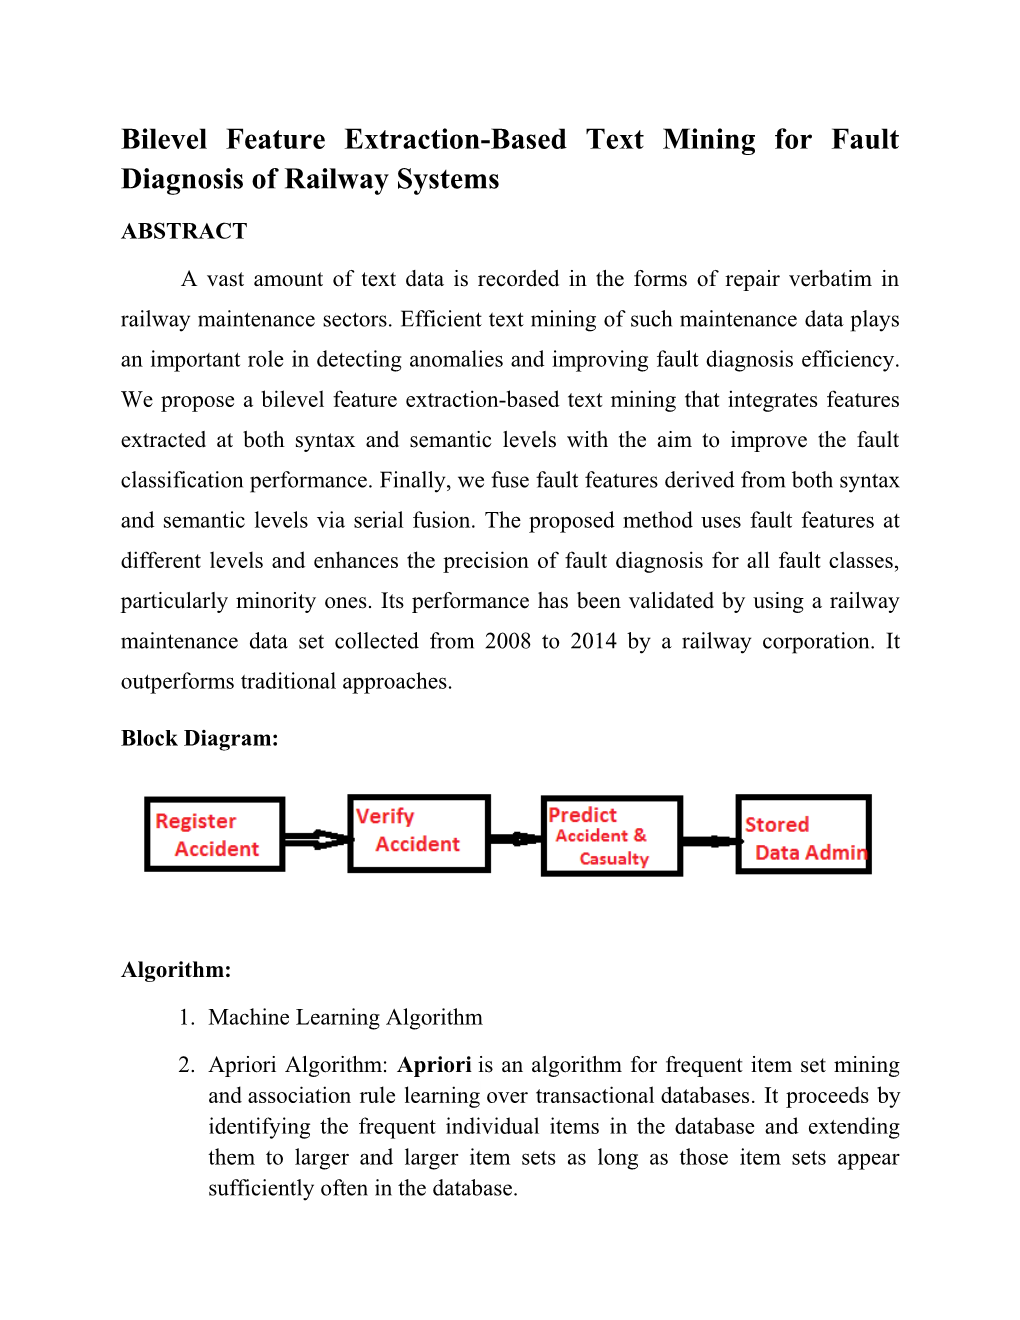 Bilevel Feature Extraction-Based Text Mining for Fault Diagnosis of Railway Systems